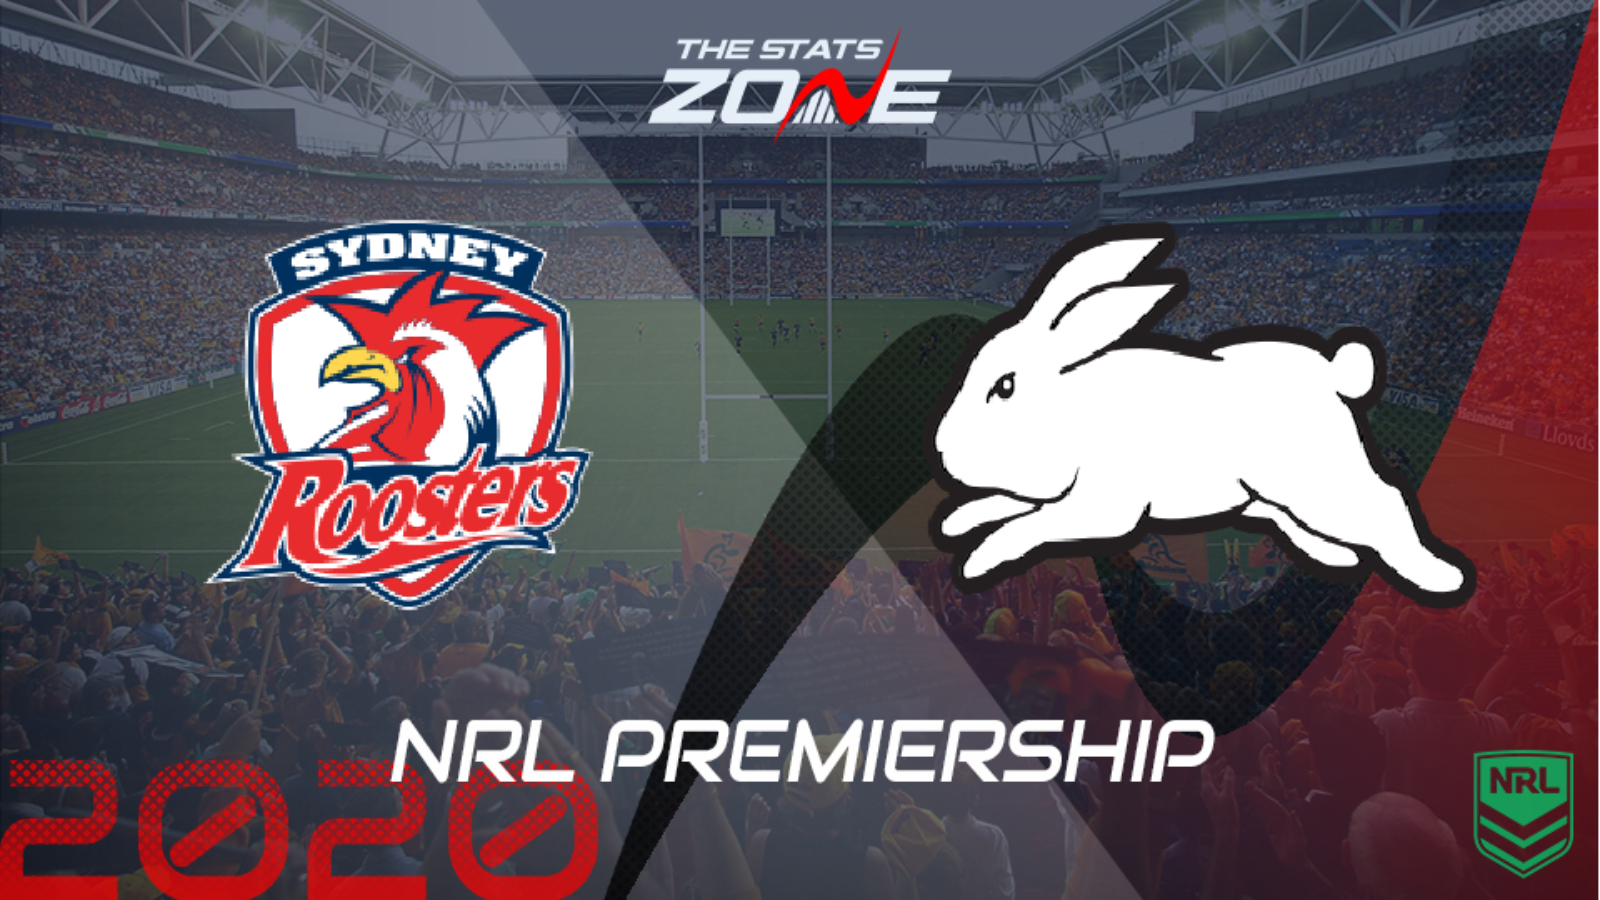 2020 Nrl Sydney Roosters Vs South Sydney Rabbitohs Preview Prediction The Stats Zone